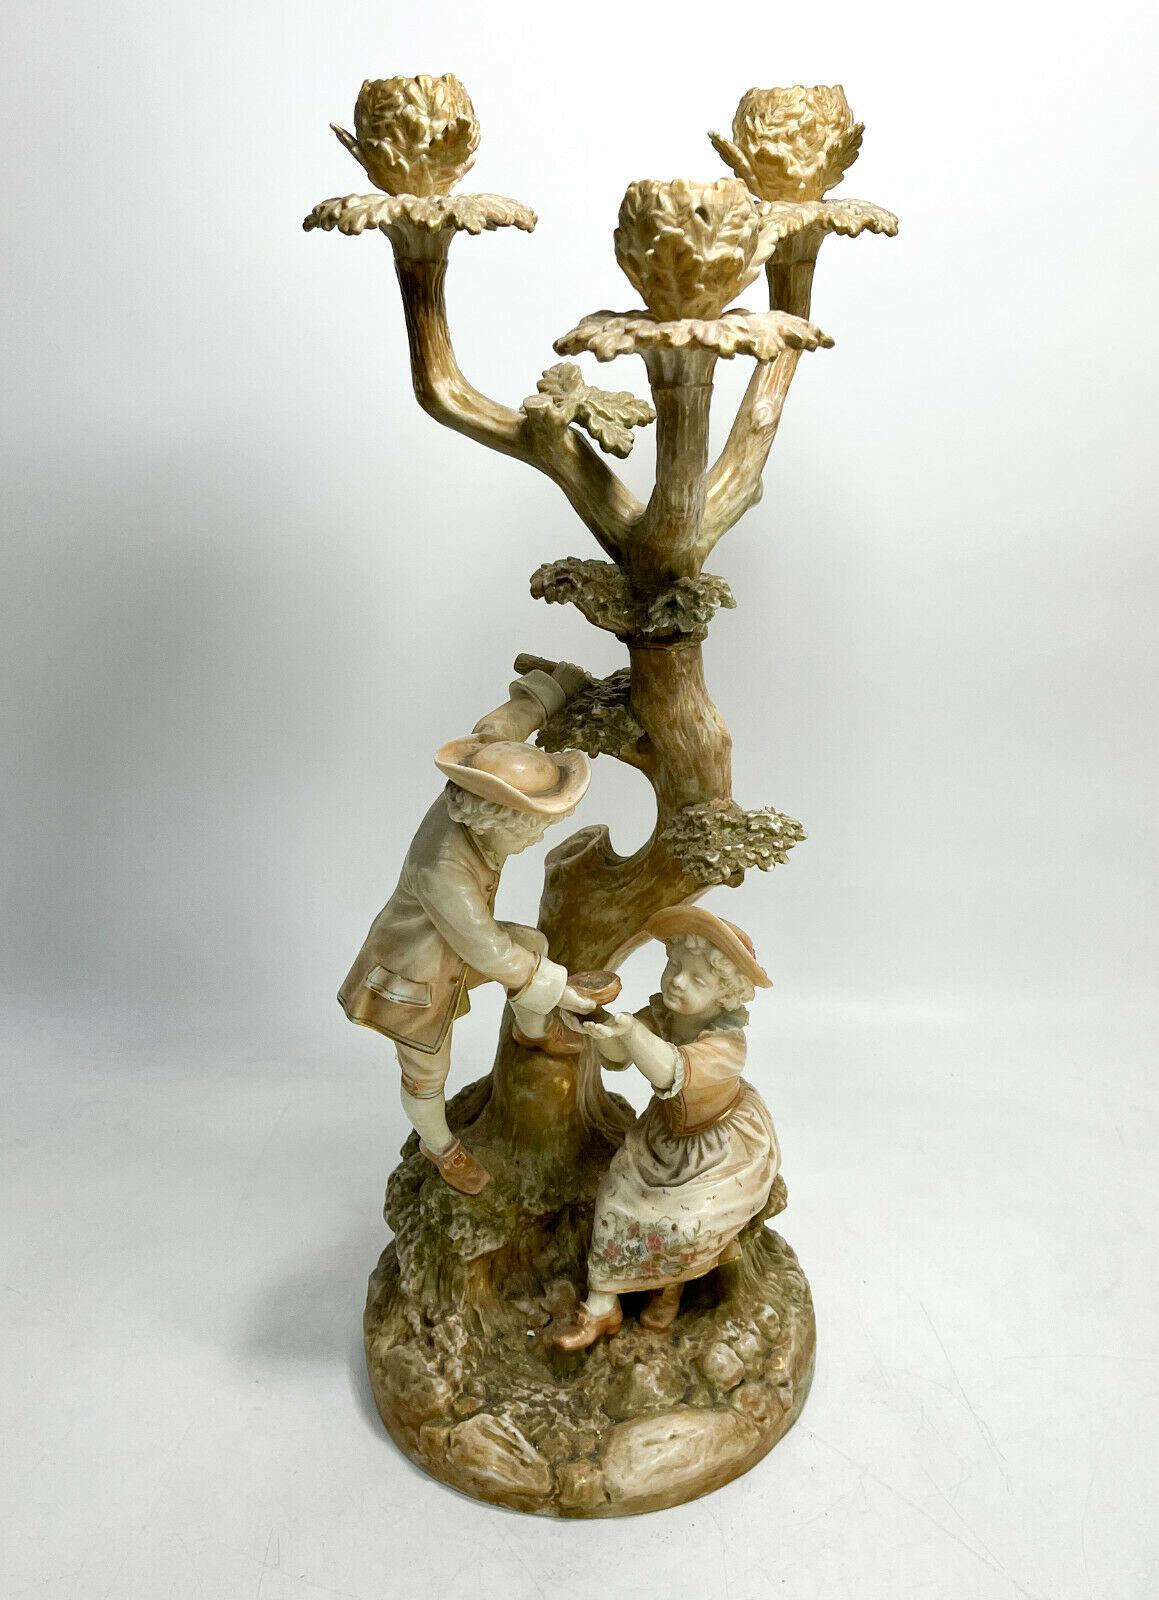 Royal Worcester England Porcelain Figural Candelabra by Hadley, 1886

The candelbra modeled after a tree with two young children in period era garbs. Artist signed 